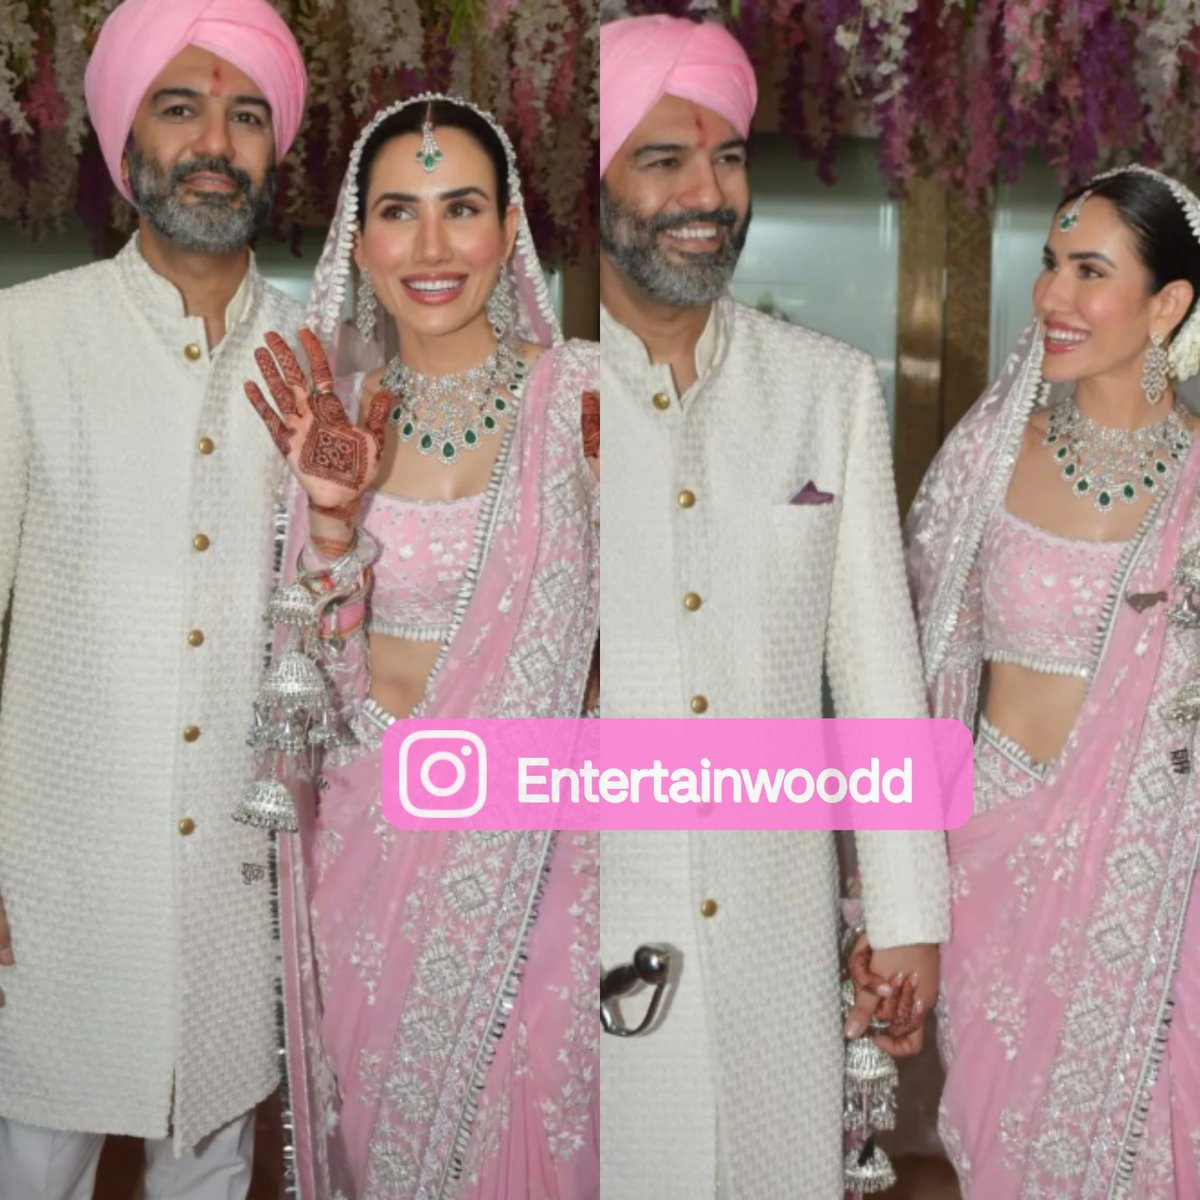 Adorable duo arrive for their Gurudwara wedding 🩷🩷
Best wishes to the couple 💐💐

#SonnaliSeygall #SonaliSeygal #SonaliSeygall #AsheshLSajnani